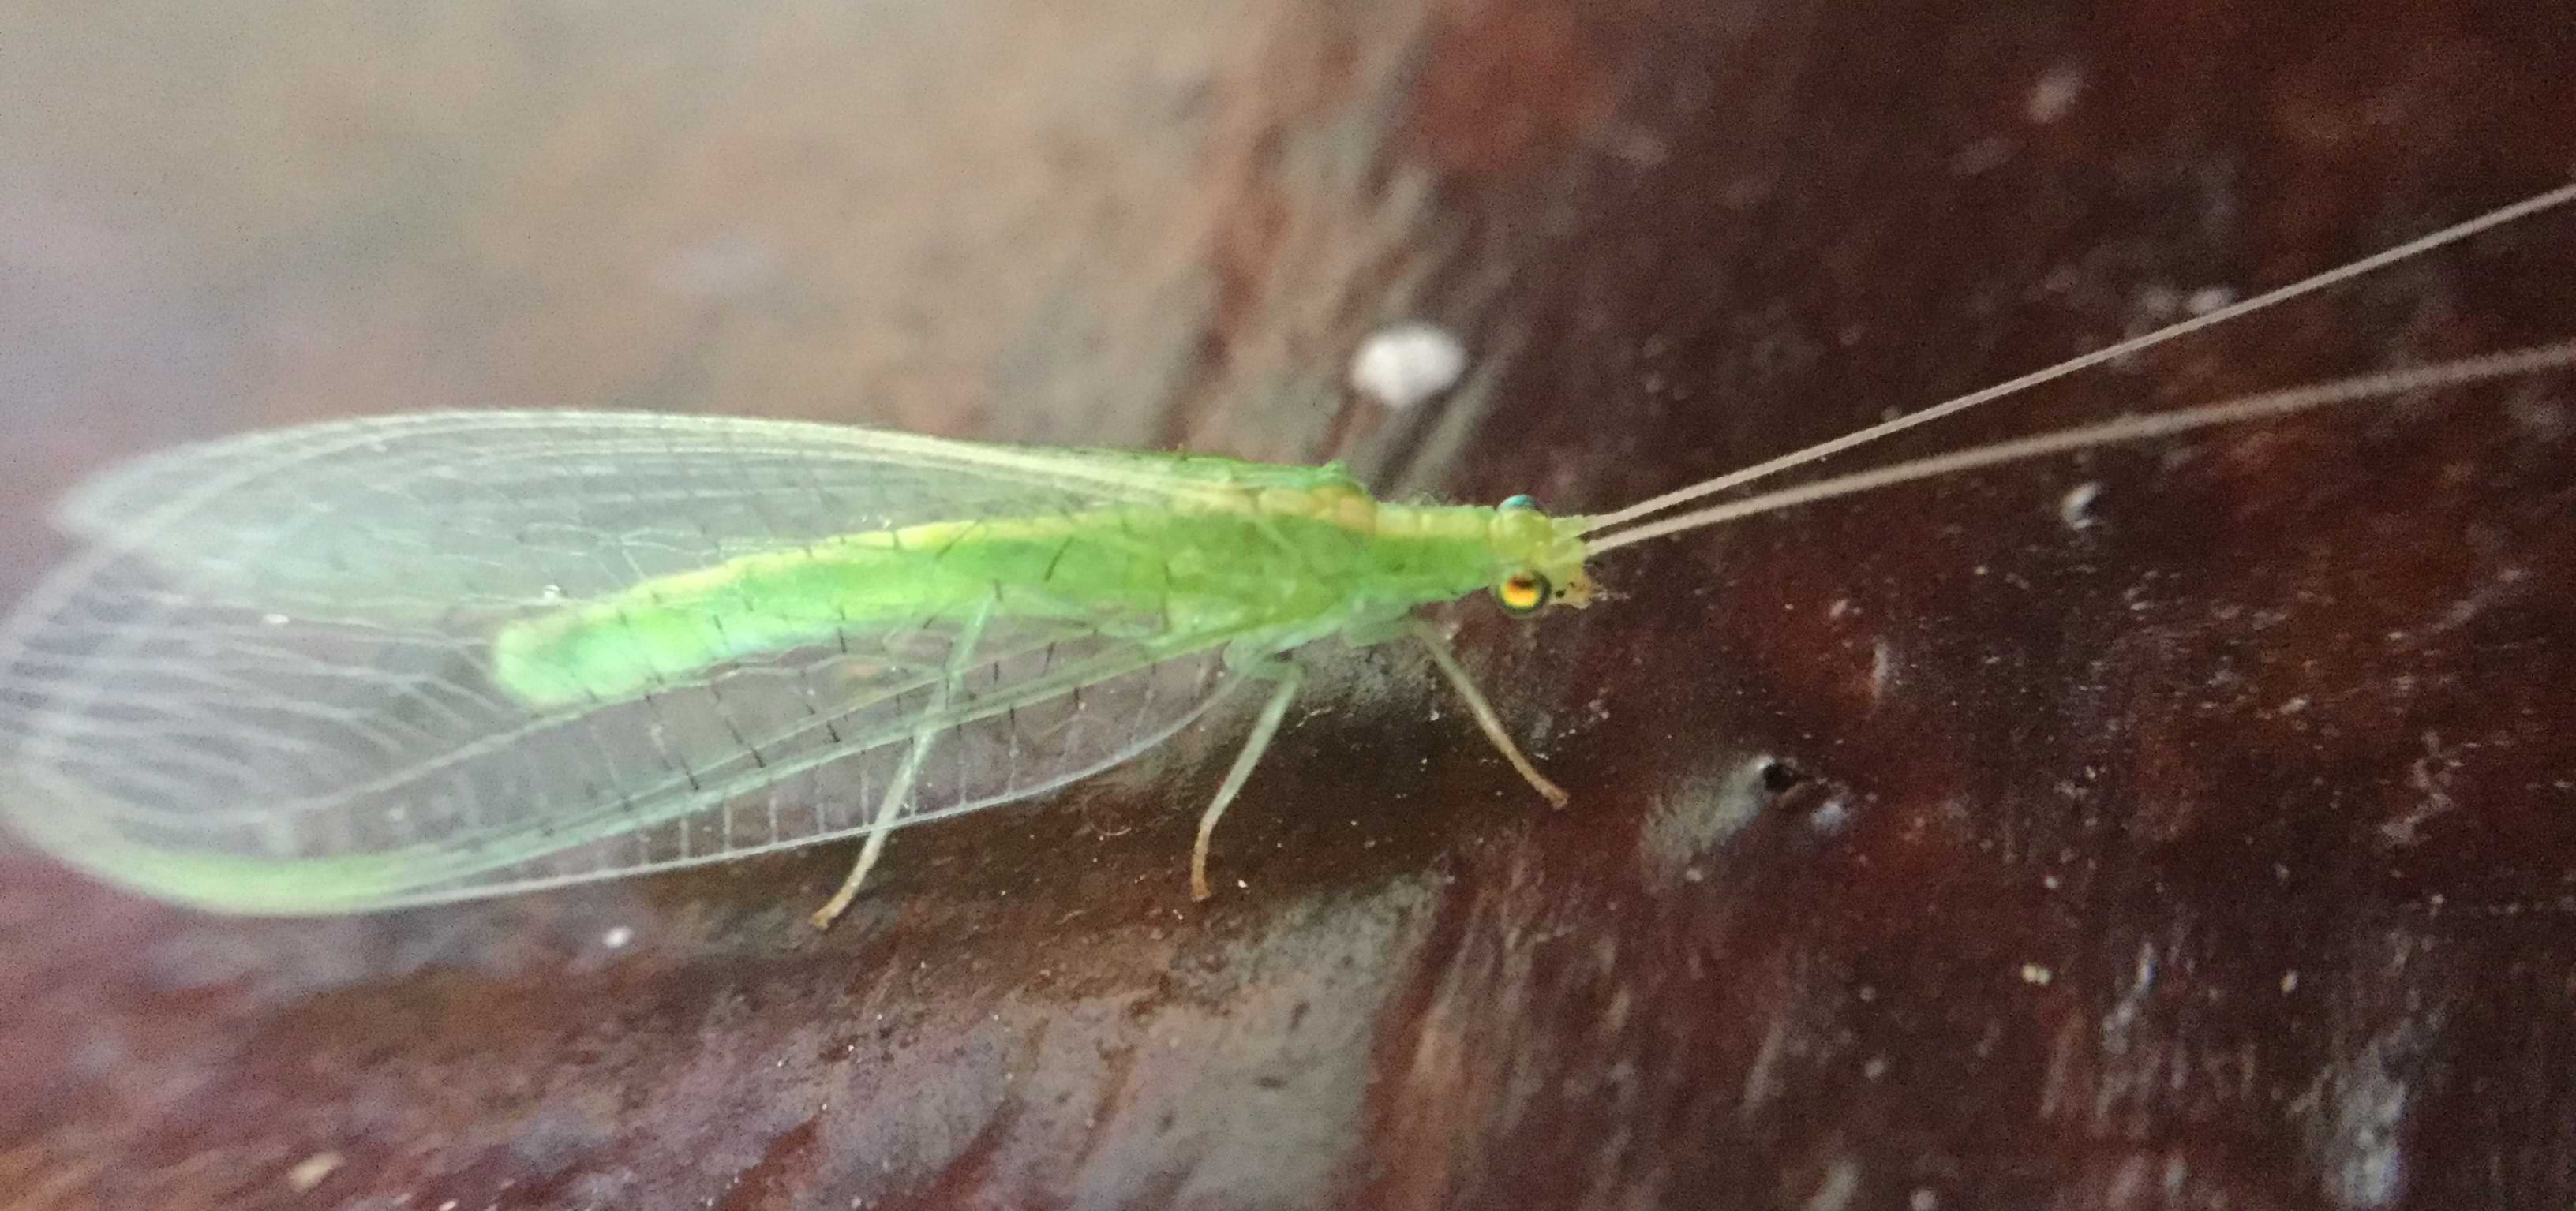 A green lacewing with very long antennae and intricate, oval-shaped wings.